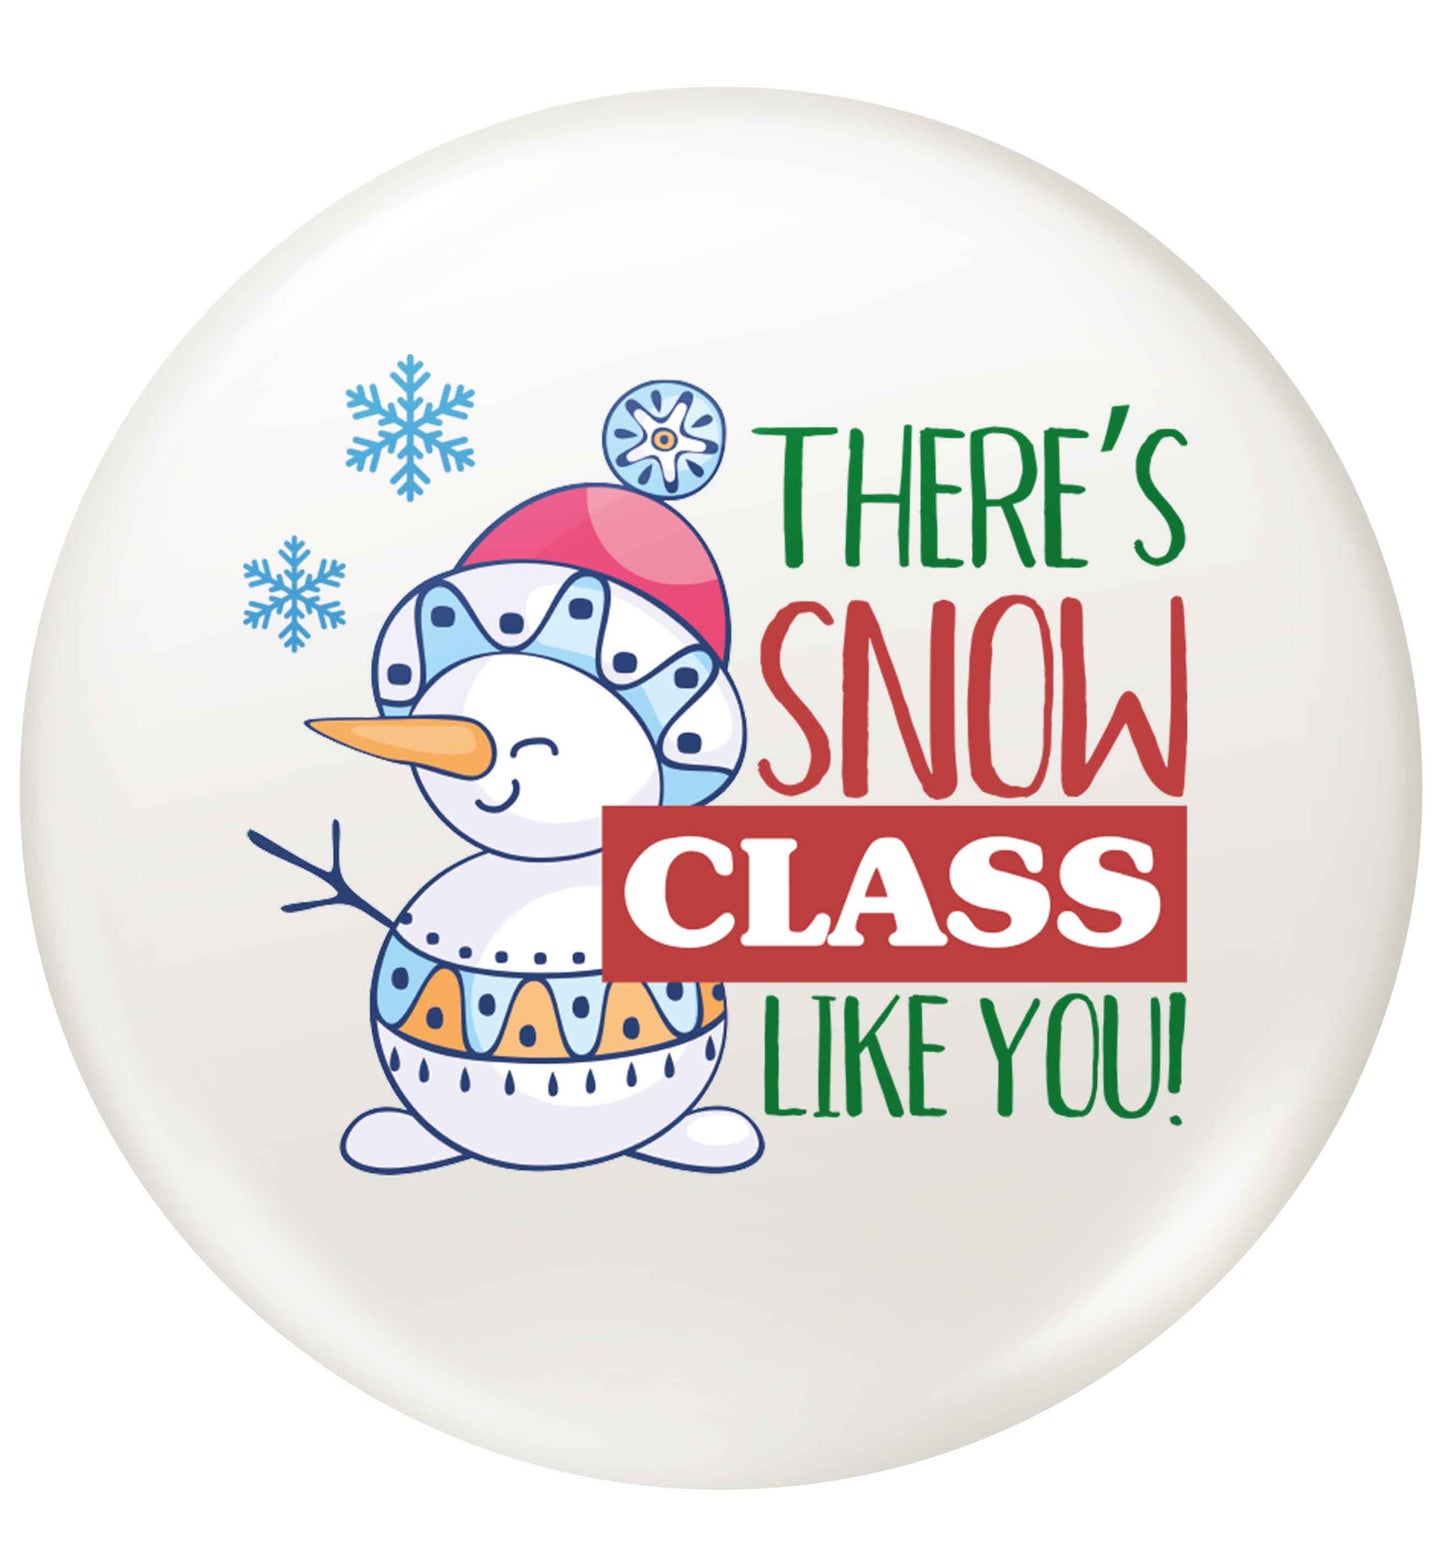 There's snow class like you small 25mm Pin badge